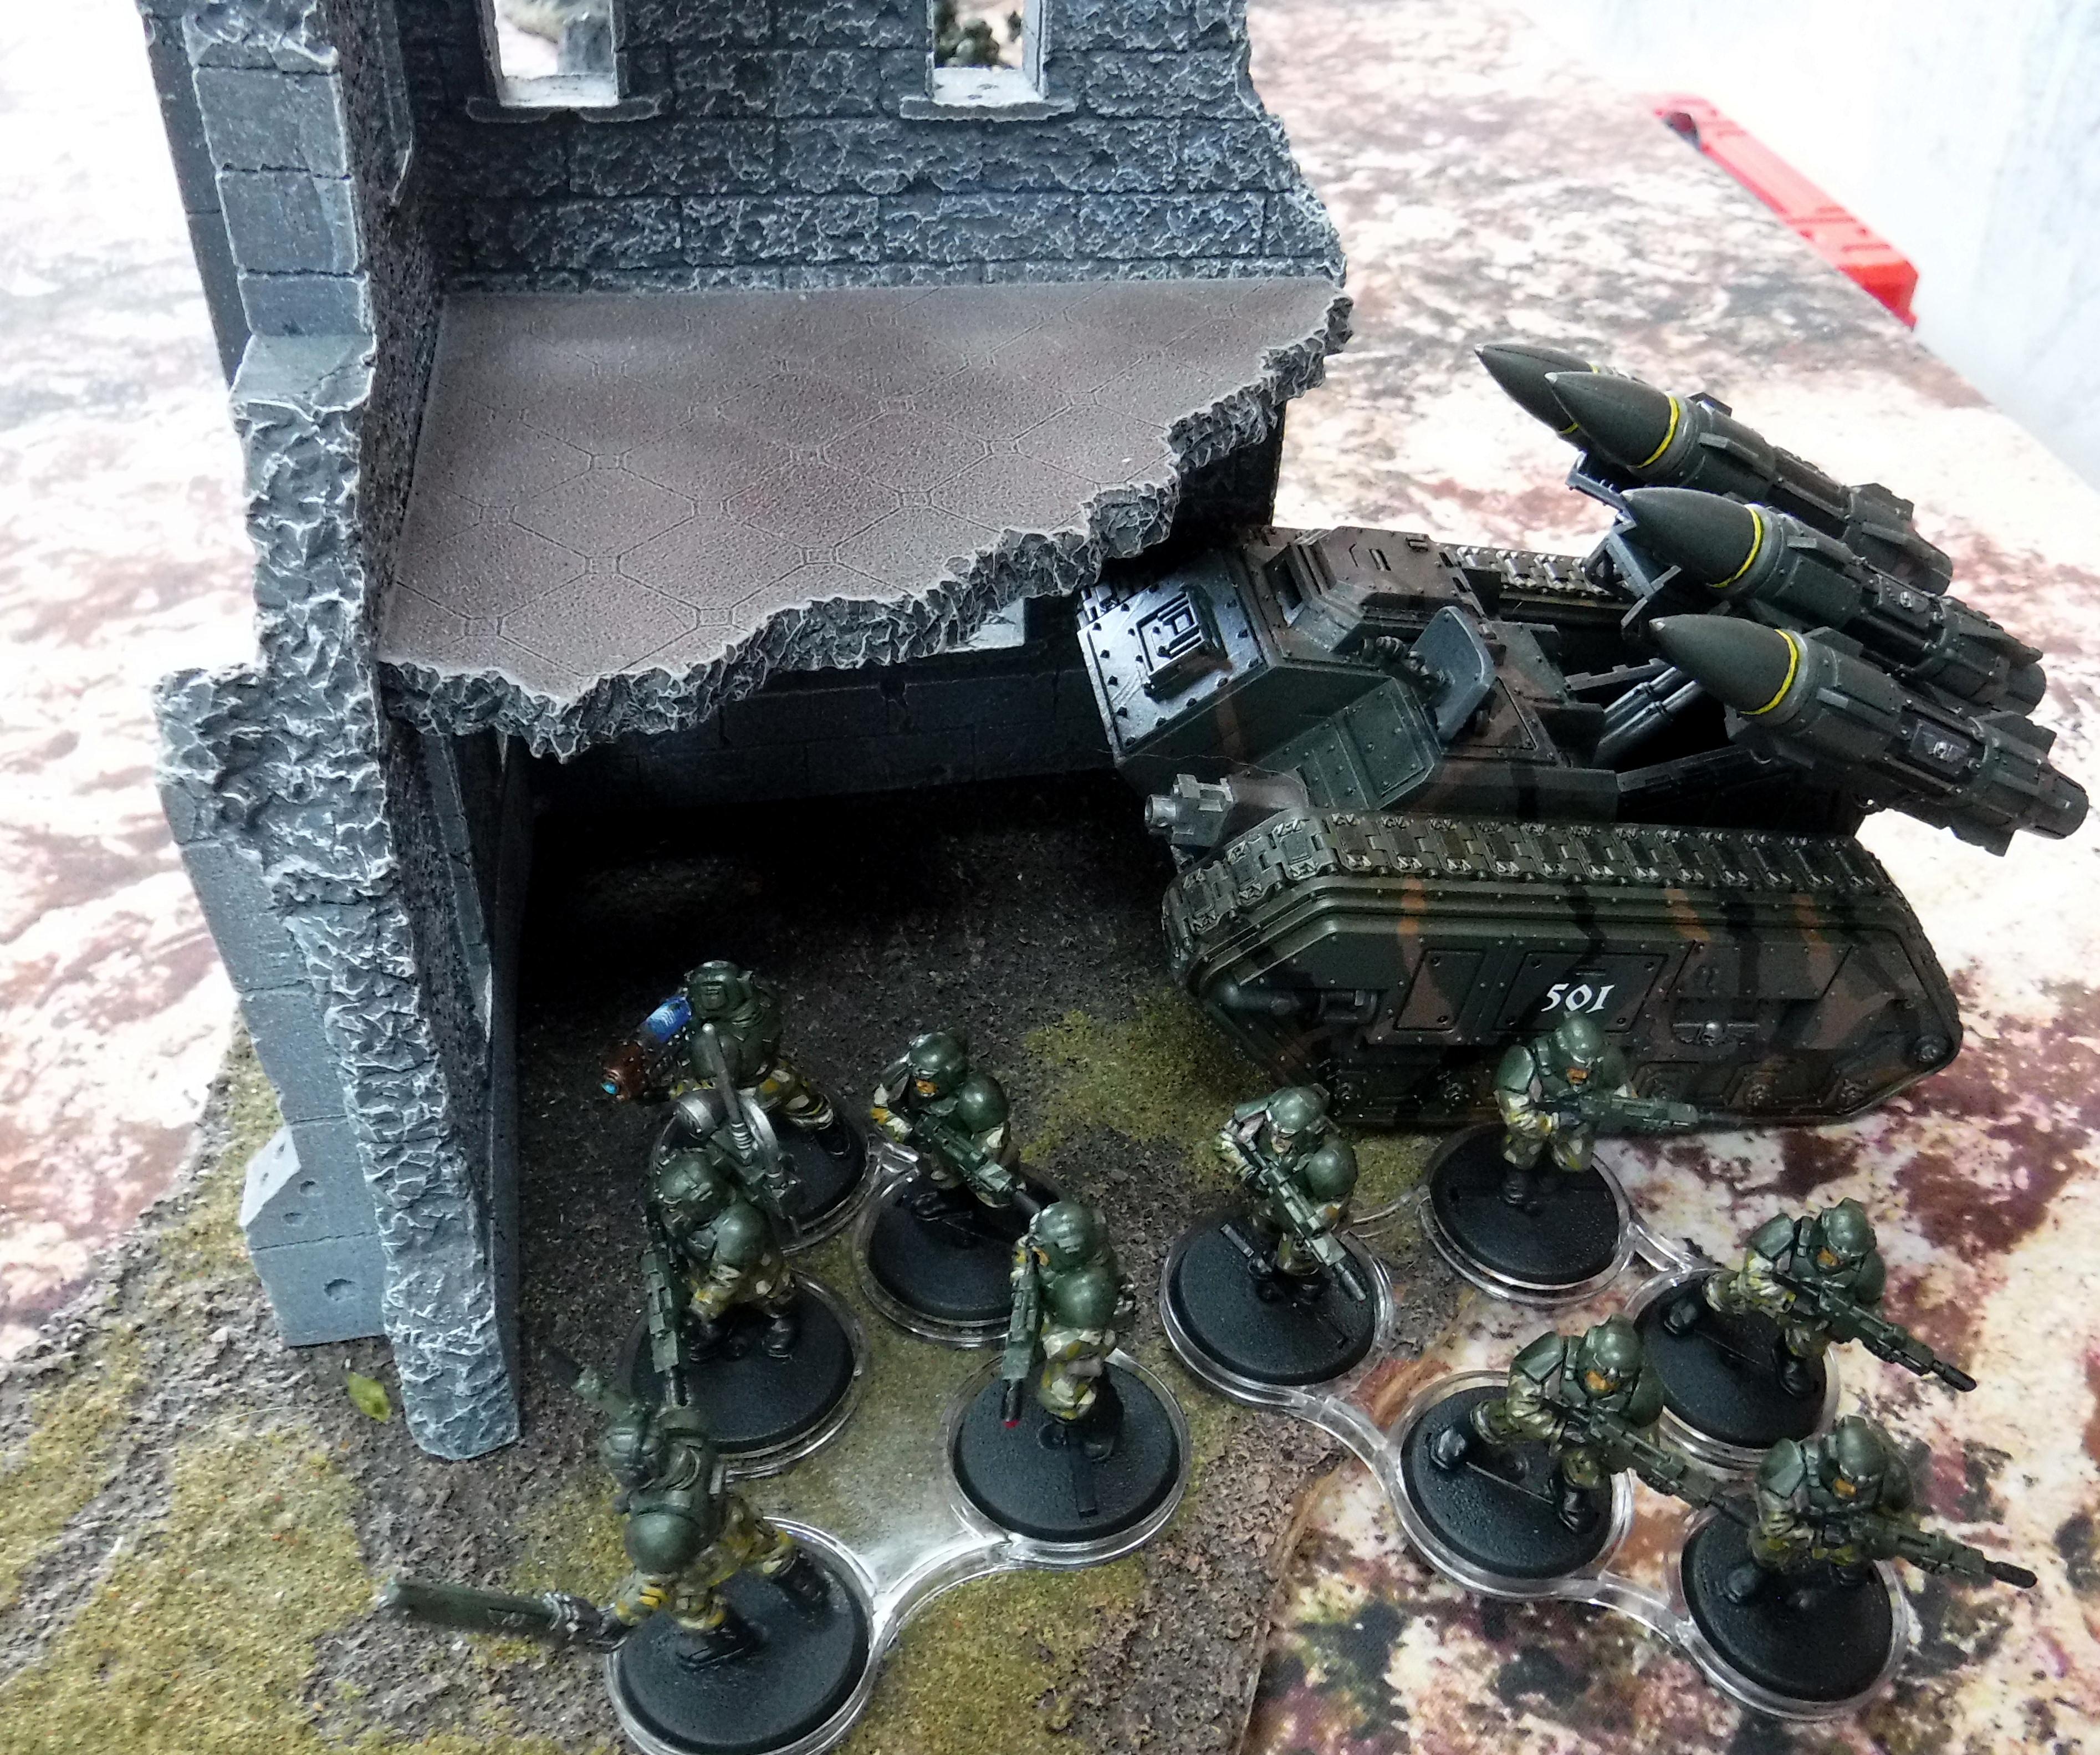 Astra Militarum, Cammo, Cammoflauge, Heavy Support, Imperial Guard, Manticore, Ruins, Storm Eagle